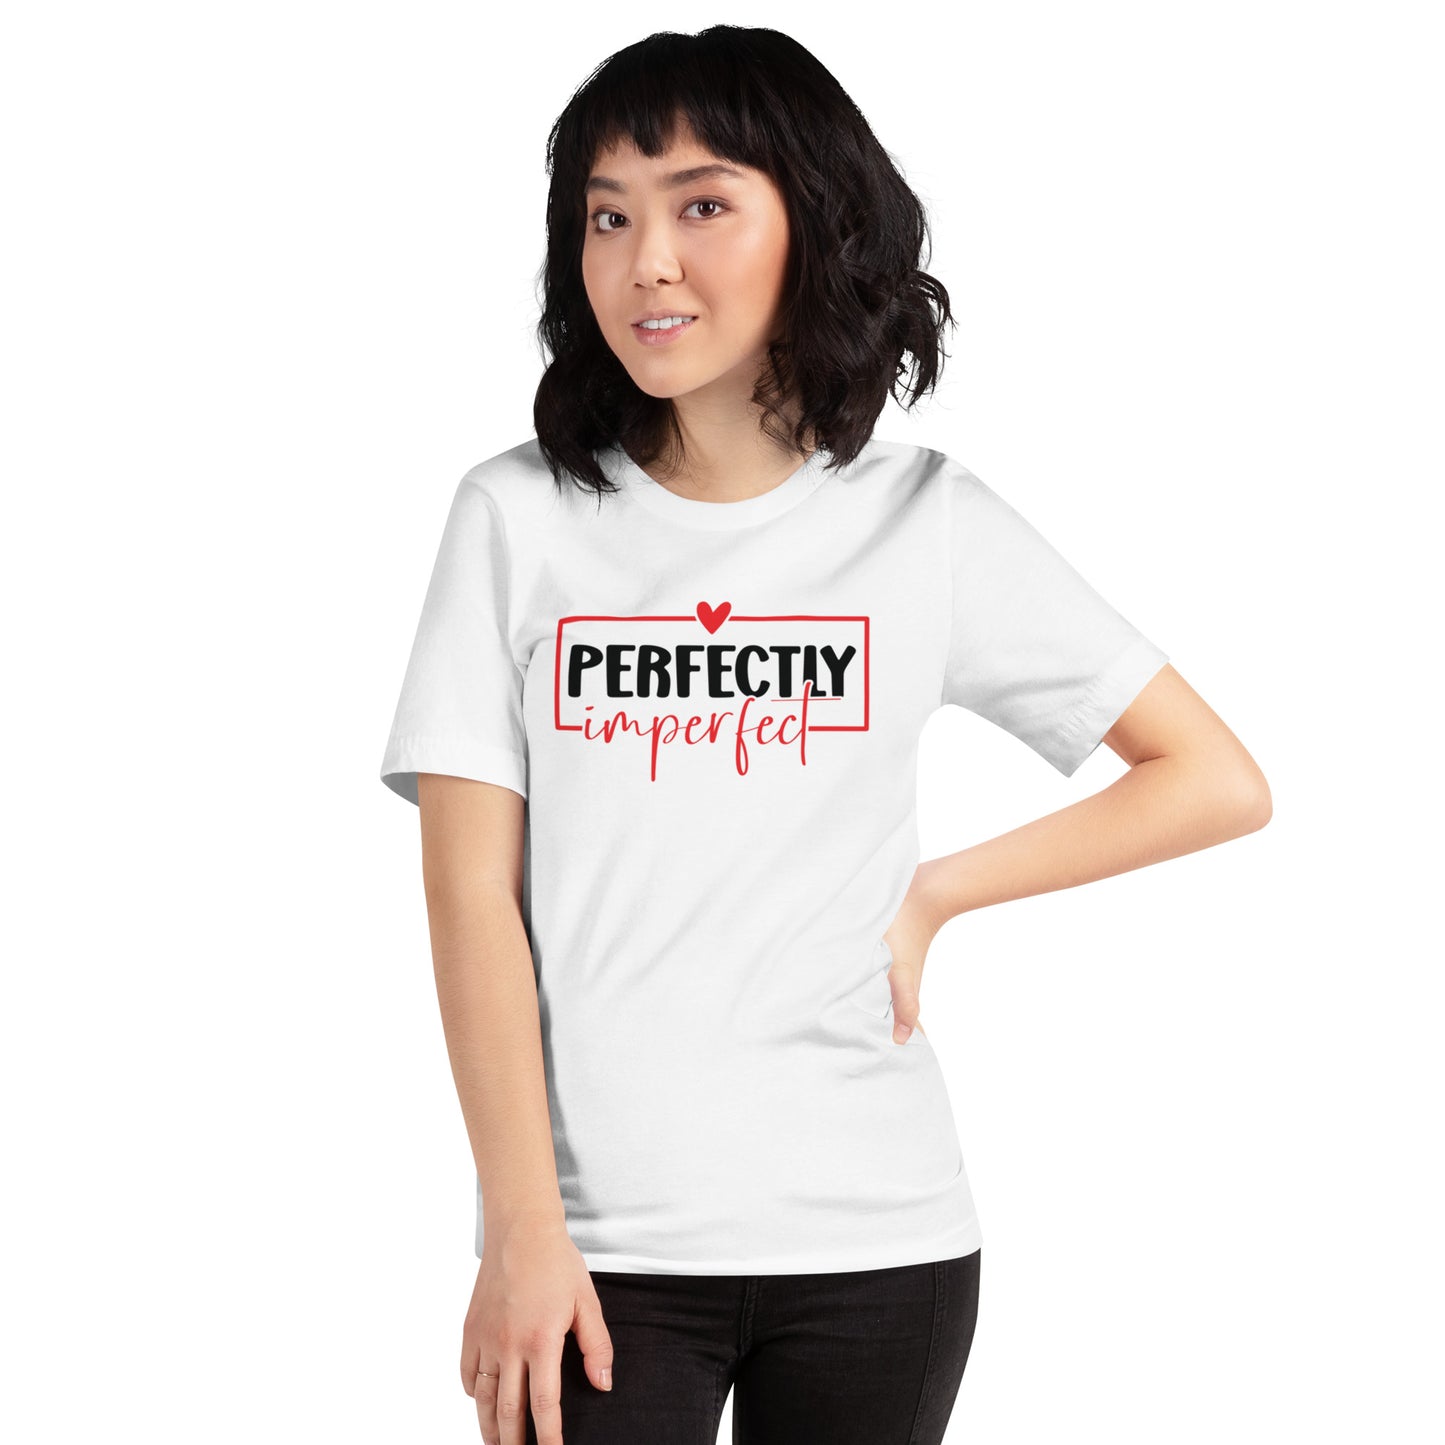 Perfectly Imperfect Unisex t-shirt